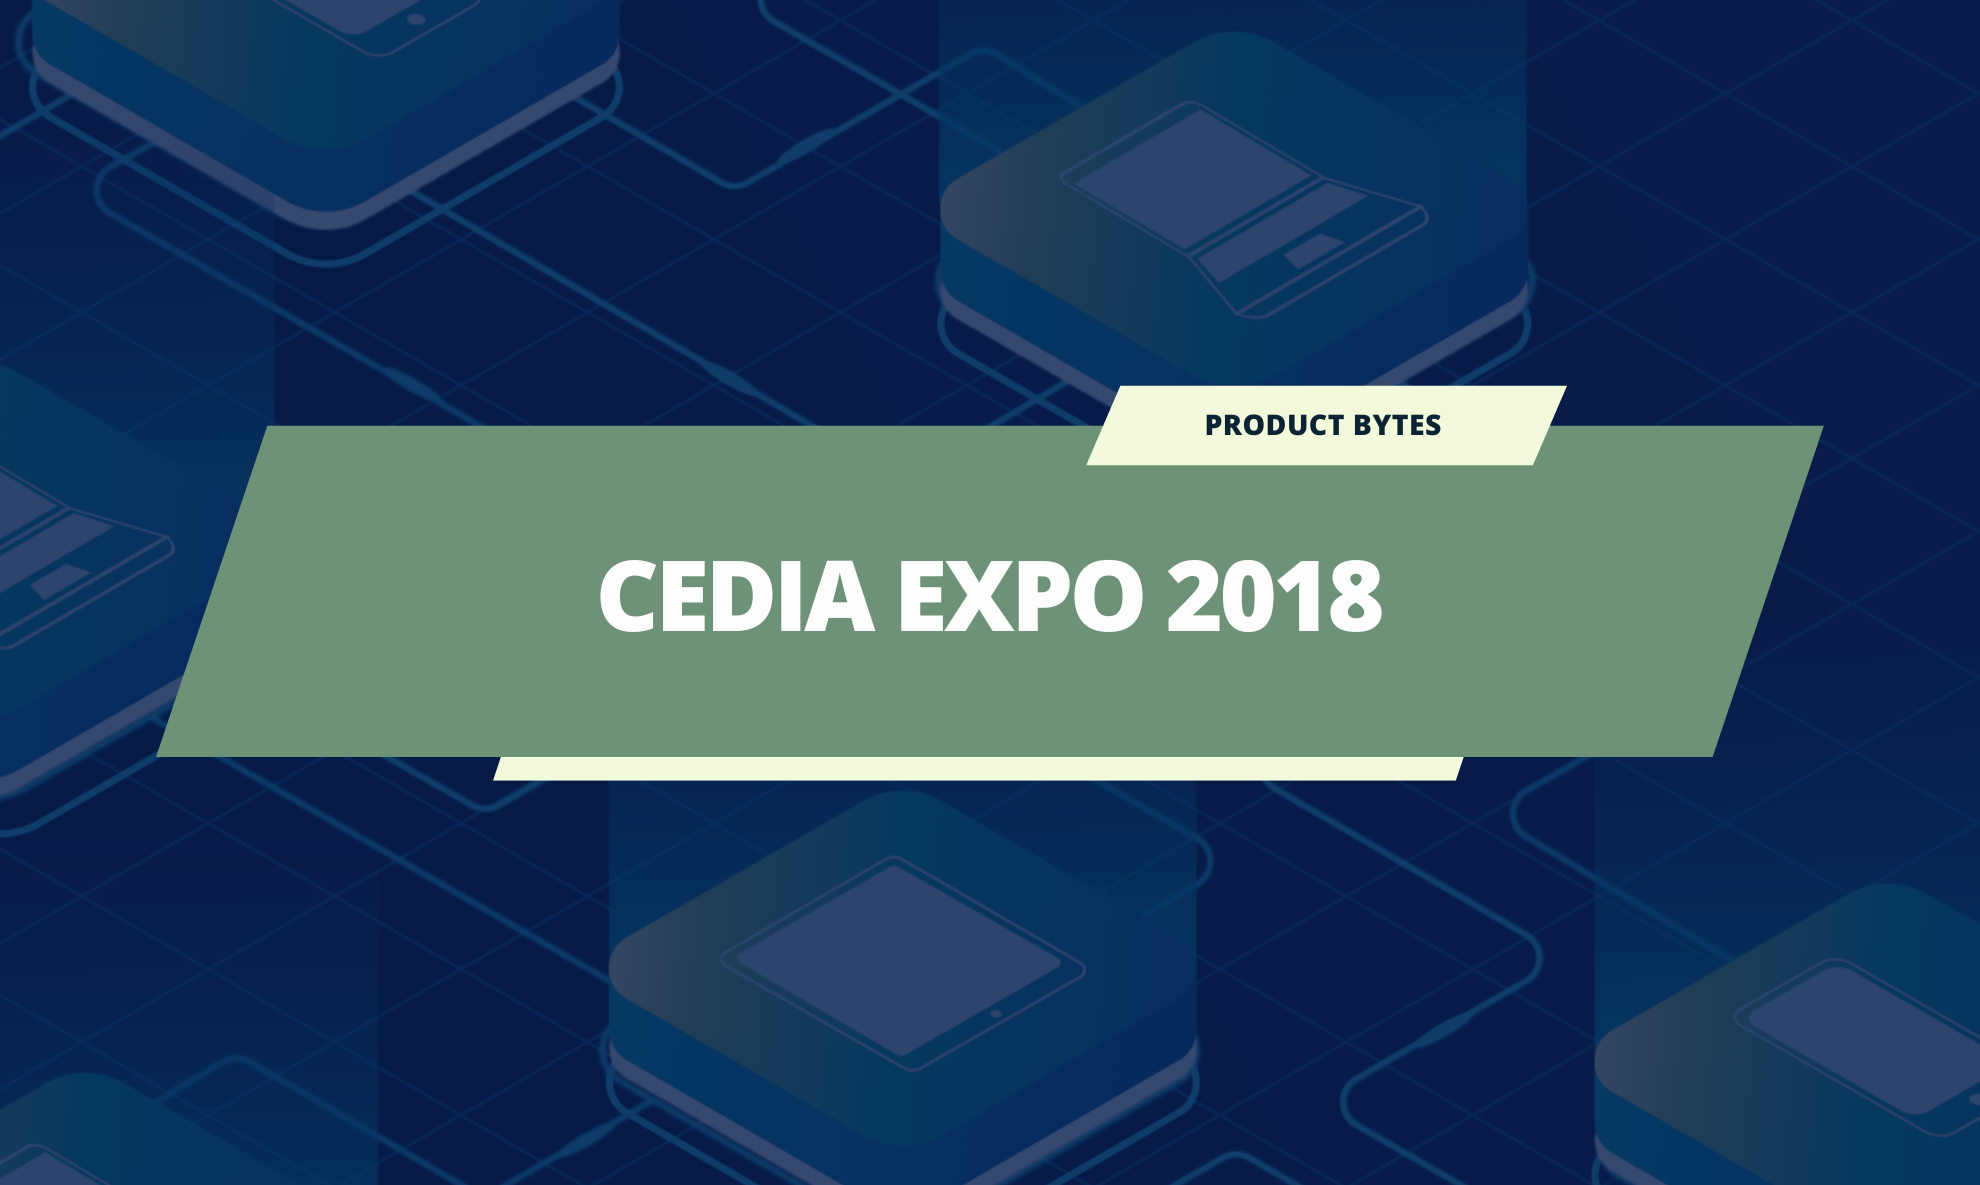 We’ll be at CEDIA Expo 2018 Showing our Network Monitoring Software